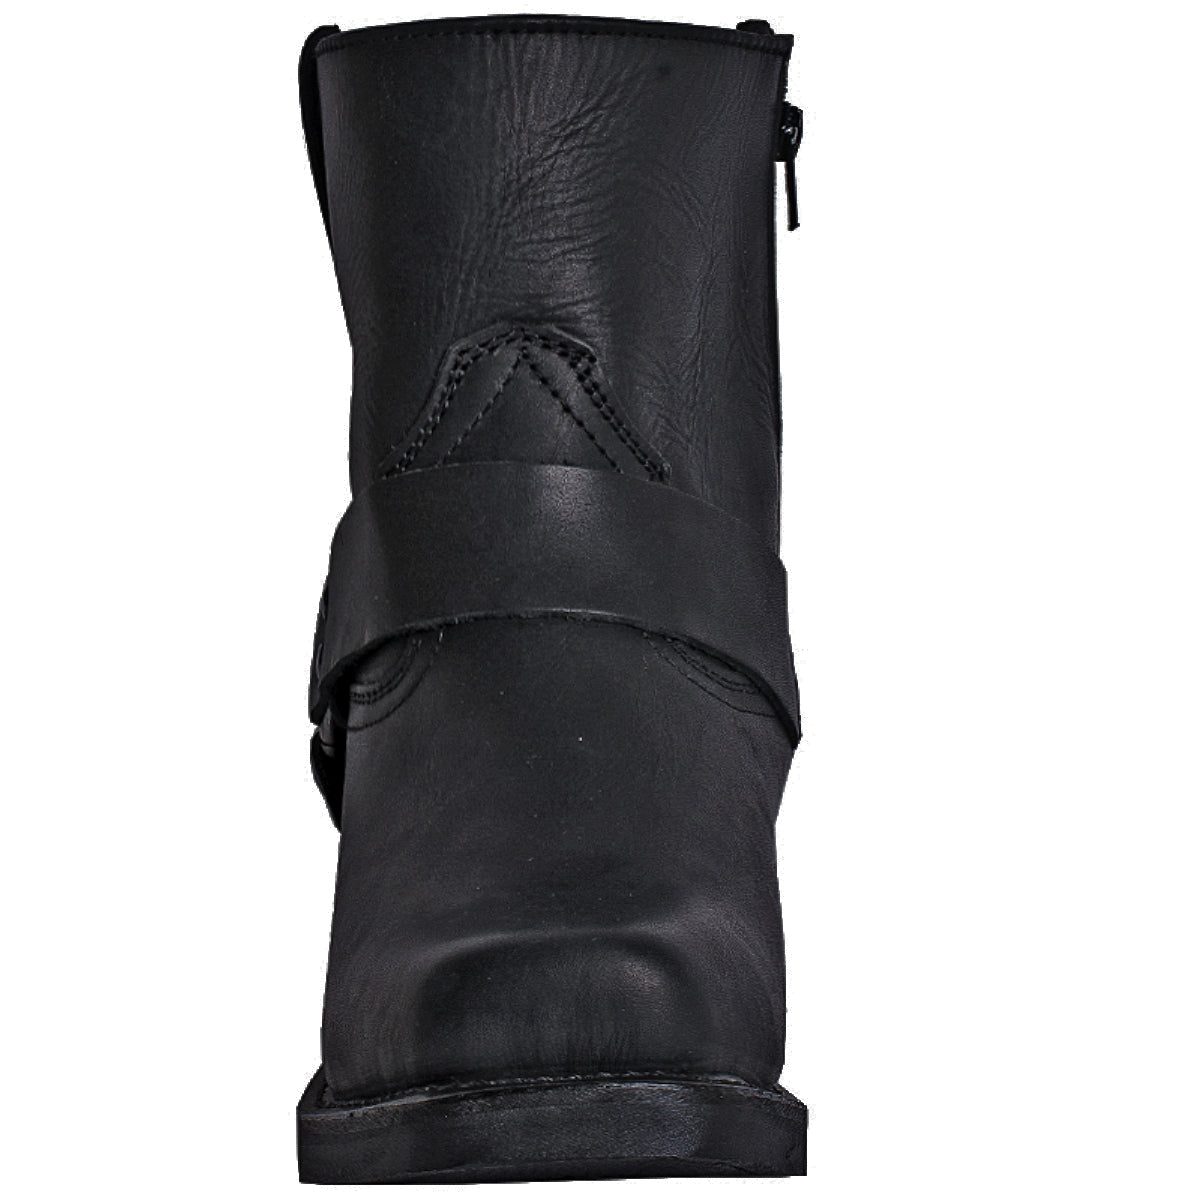 The Rev Up is a high-performance boot. Genuine leather construction from top to foot. Features a leather harness and brass ring. Classic snoot toe, soft lining and oil-resistant outsole.  LEATHER 11" HEIGHT 13" CIRCUMFERENCE Heel Height: 1 1/4" CUSHION COMFORT INSOLE SQUARE TOE OIL AND HEAT RESISTANT RUBBER OUTSOLE DOGGER HEEL